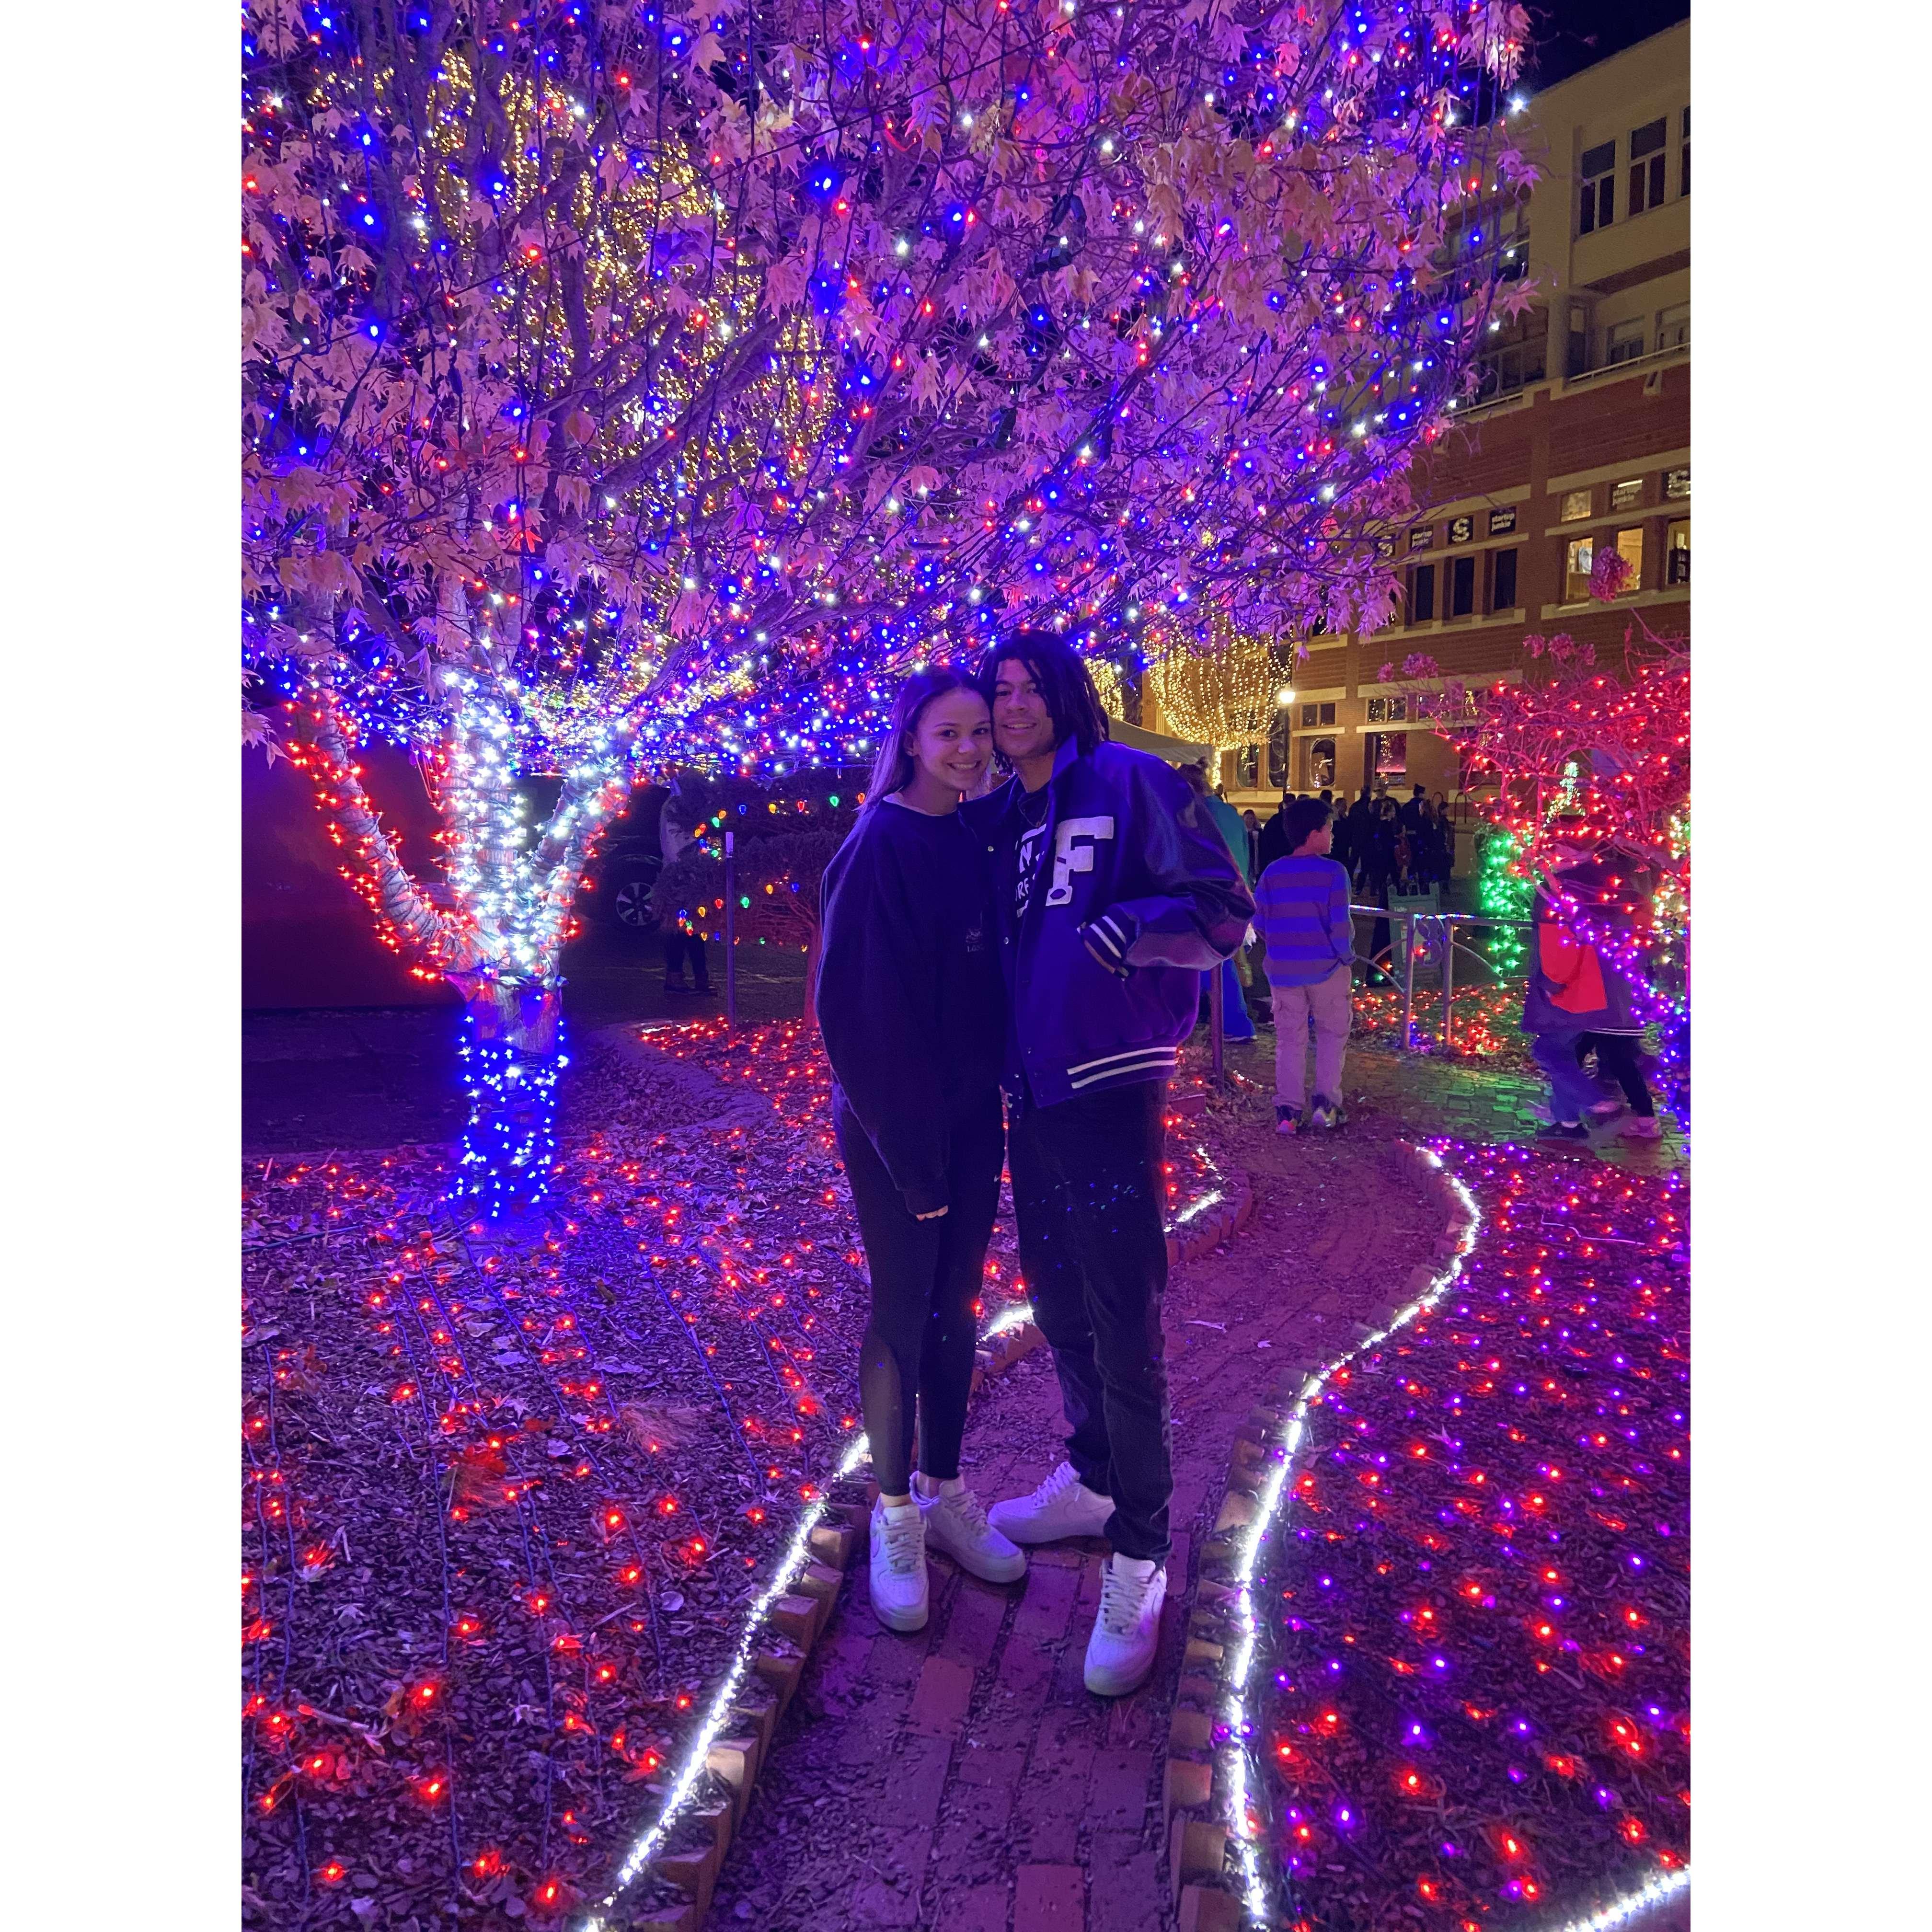 Fayetteville square lights, Christmas 2019